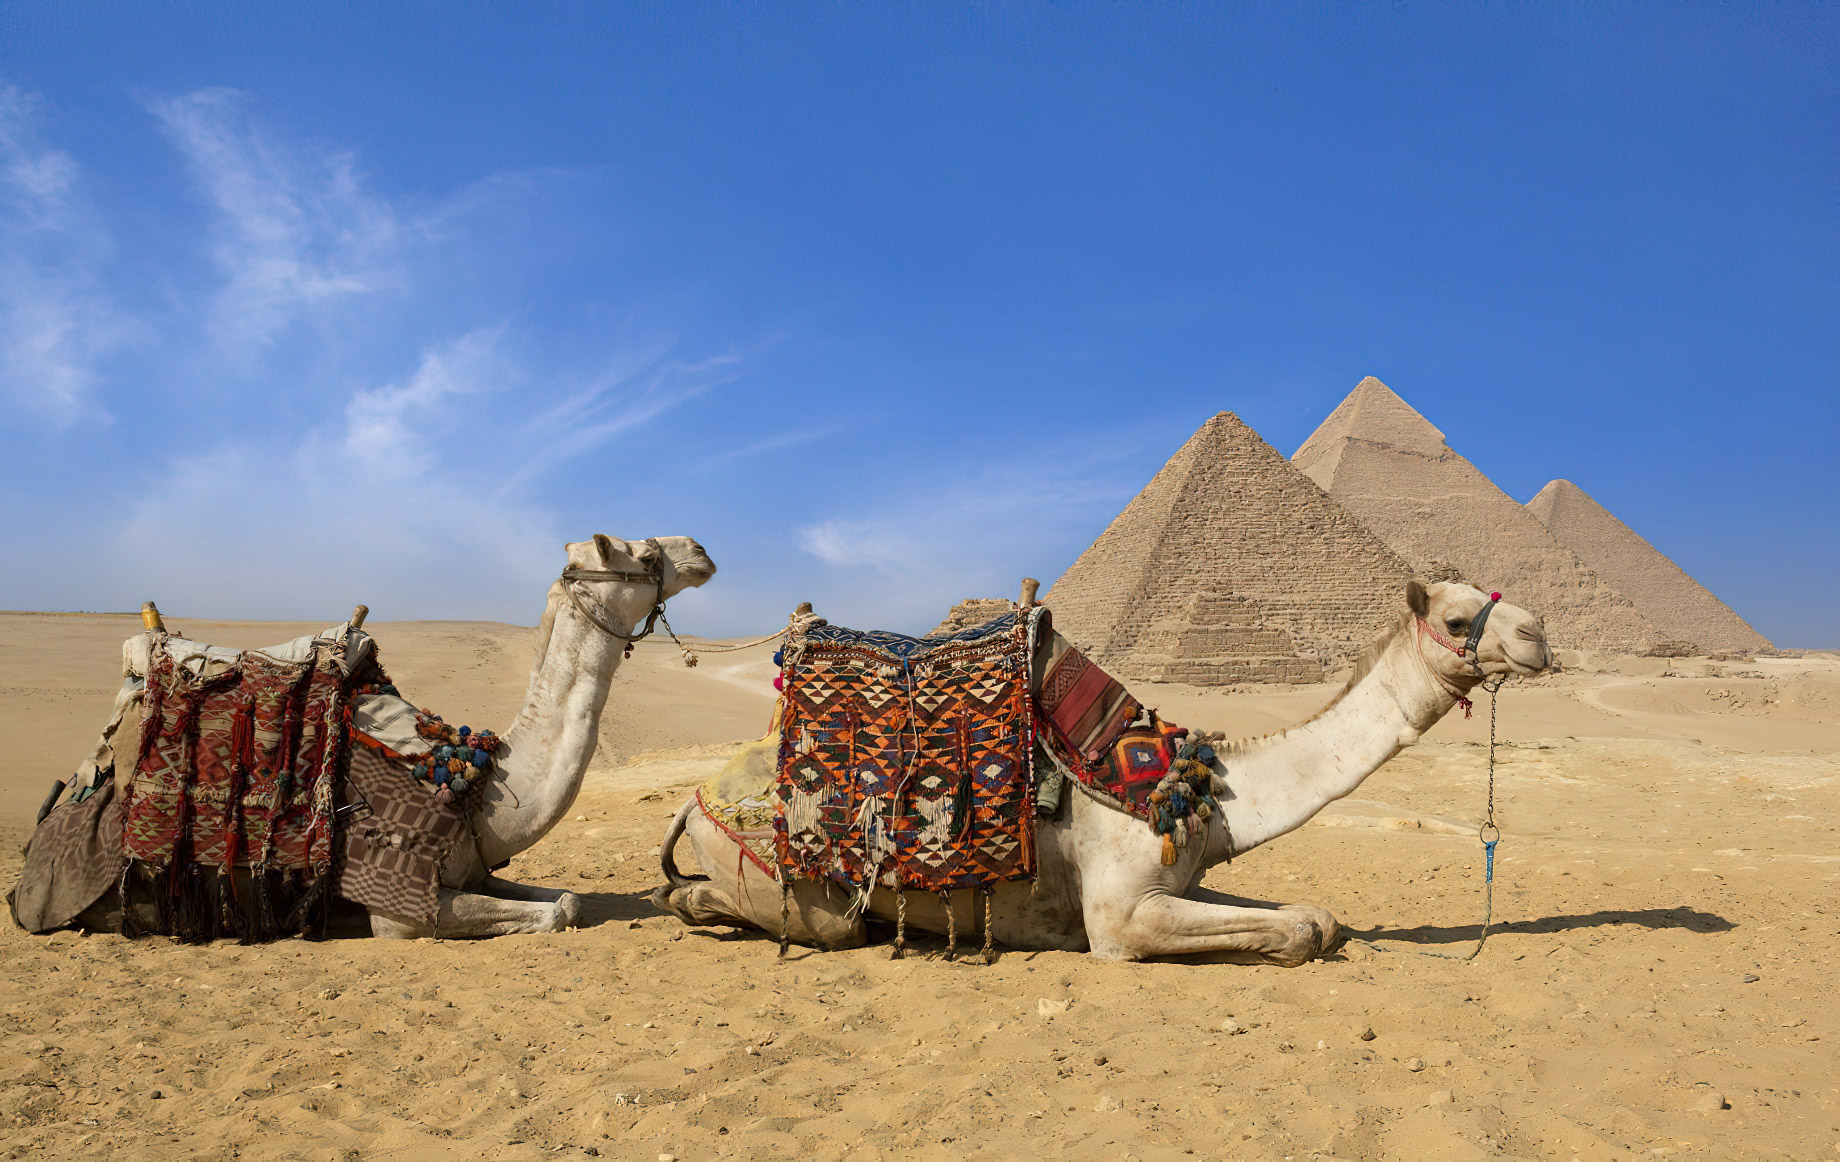 The Nile Ritz-Carlton, Cairo Hotel – Cairo, Egypt – Camels in front of Pyramids